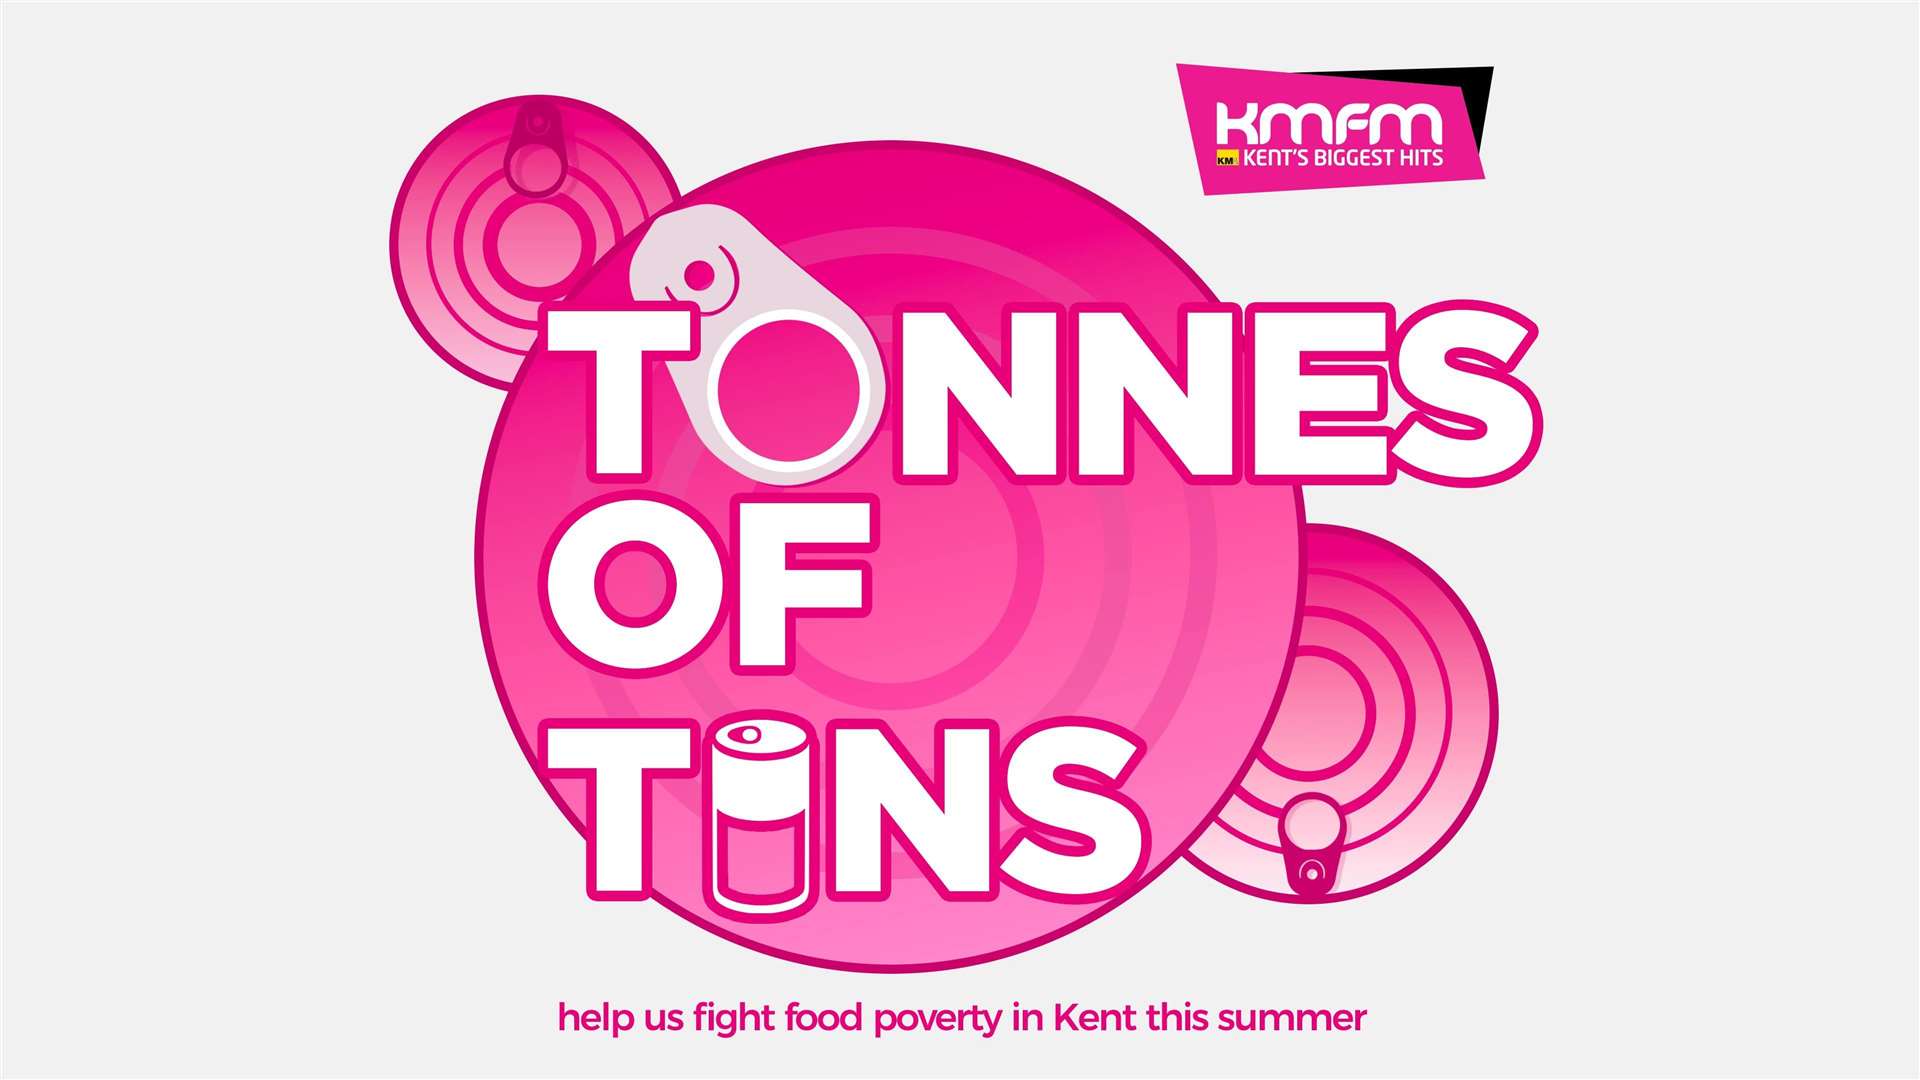 kmfm wants to collect as many tonnes of tins as possible over the next six weeks